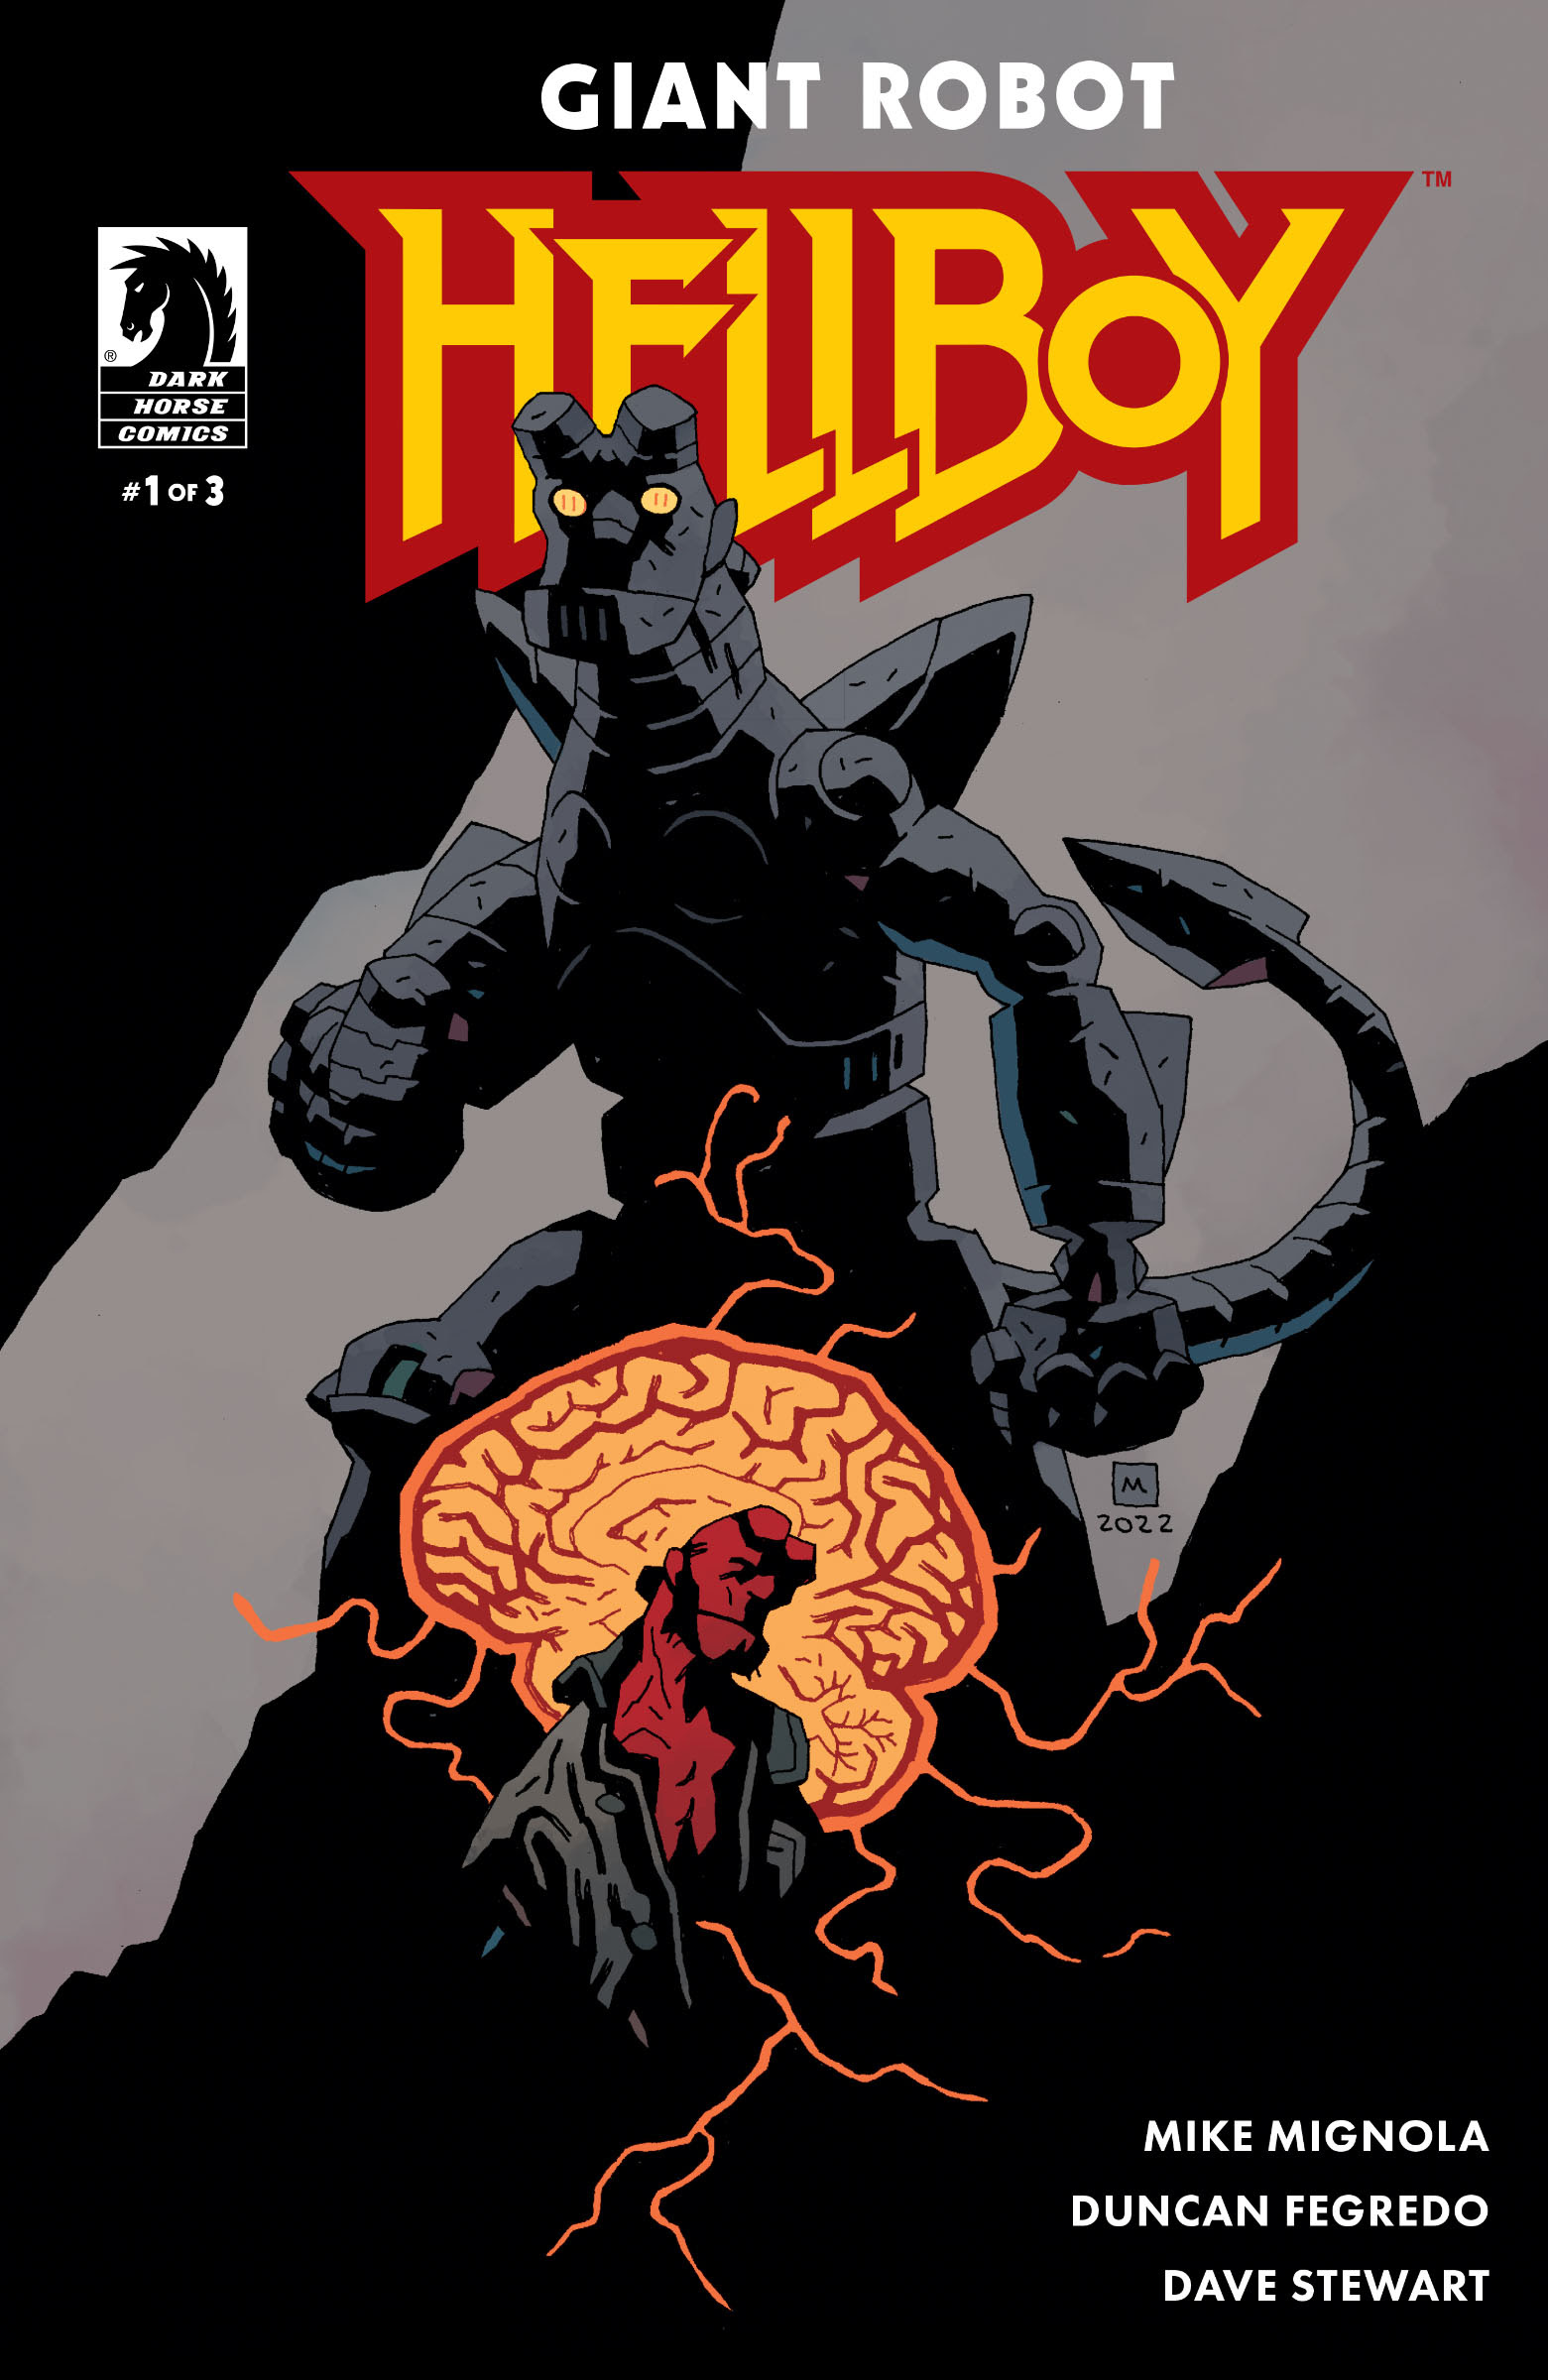 Giant Robot Hellboy #1 Variant Cover